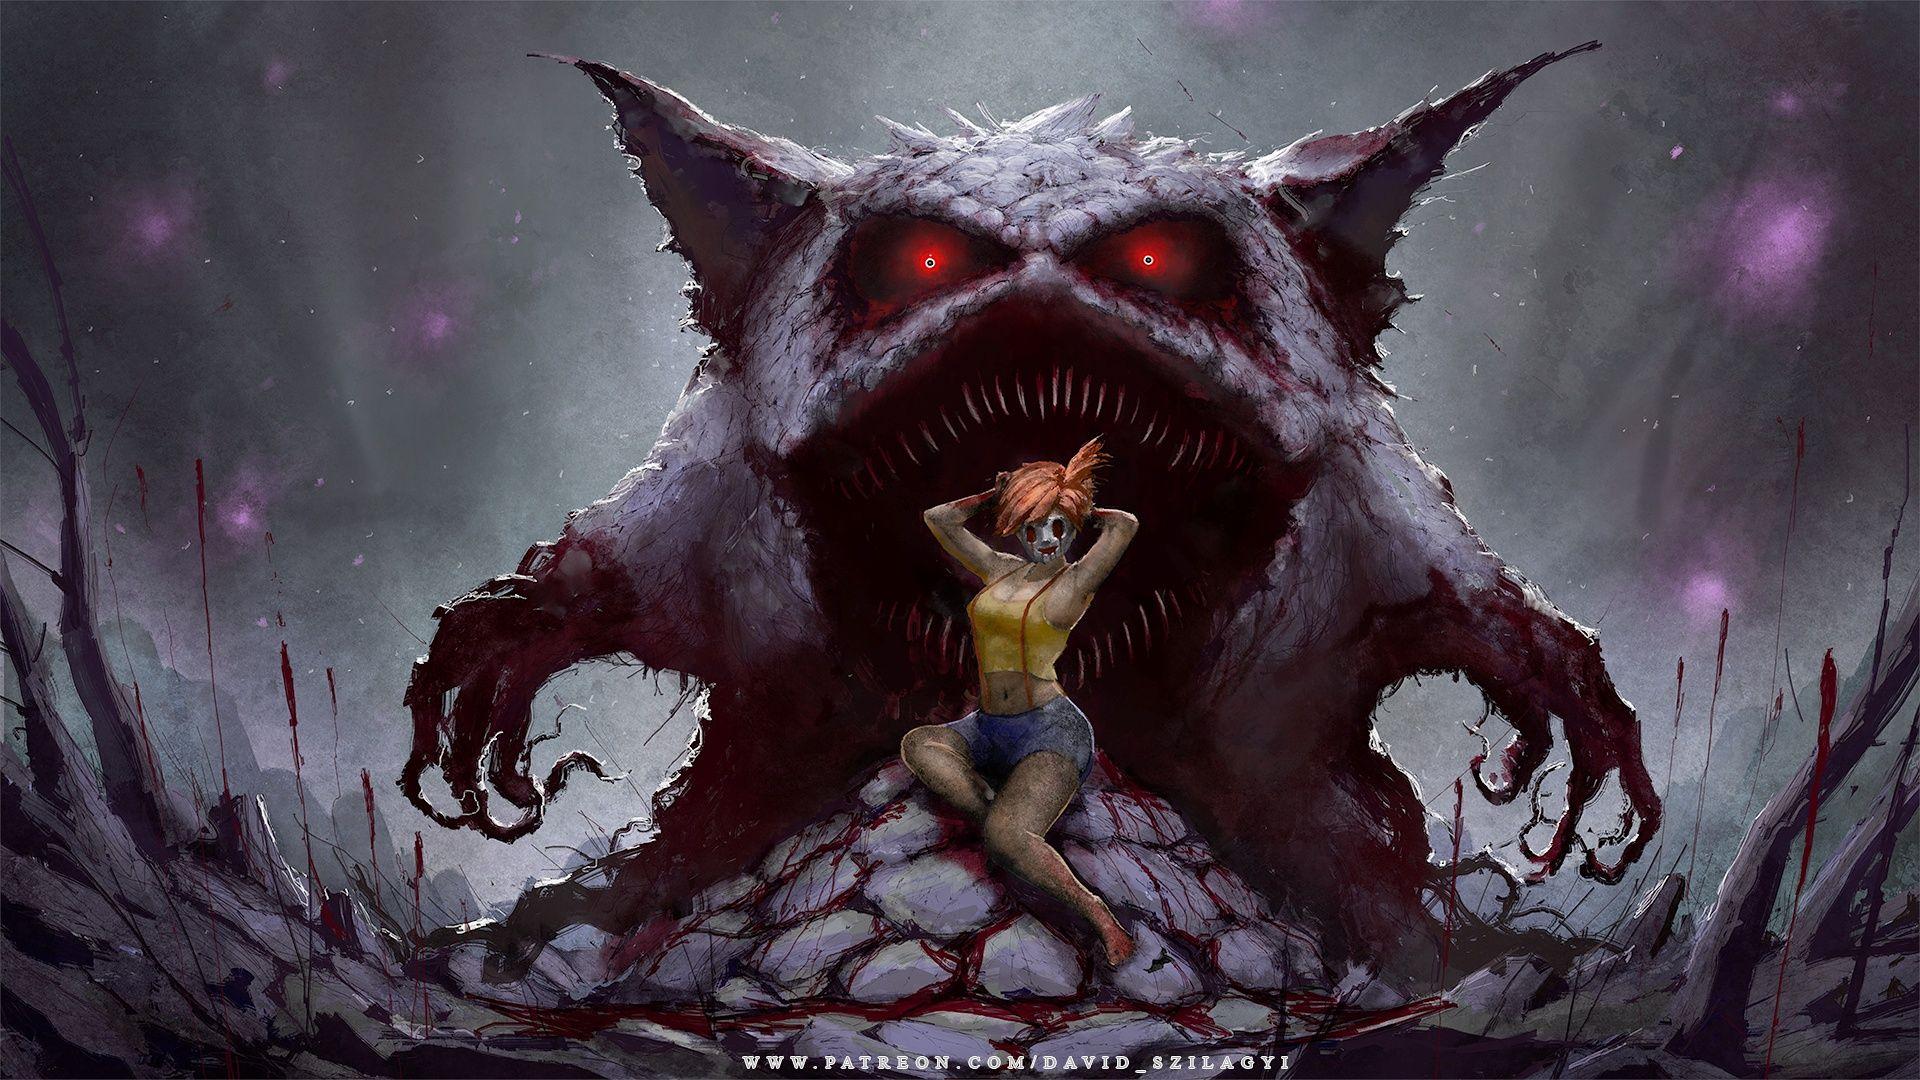 For My Fans! Misty Gengar Creepy Pinup Wallpaper 1920x1080p